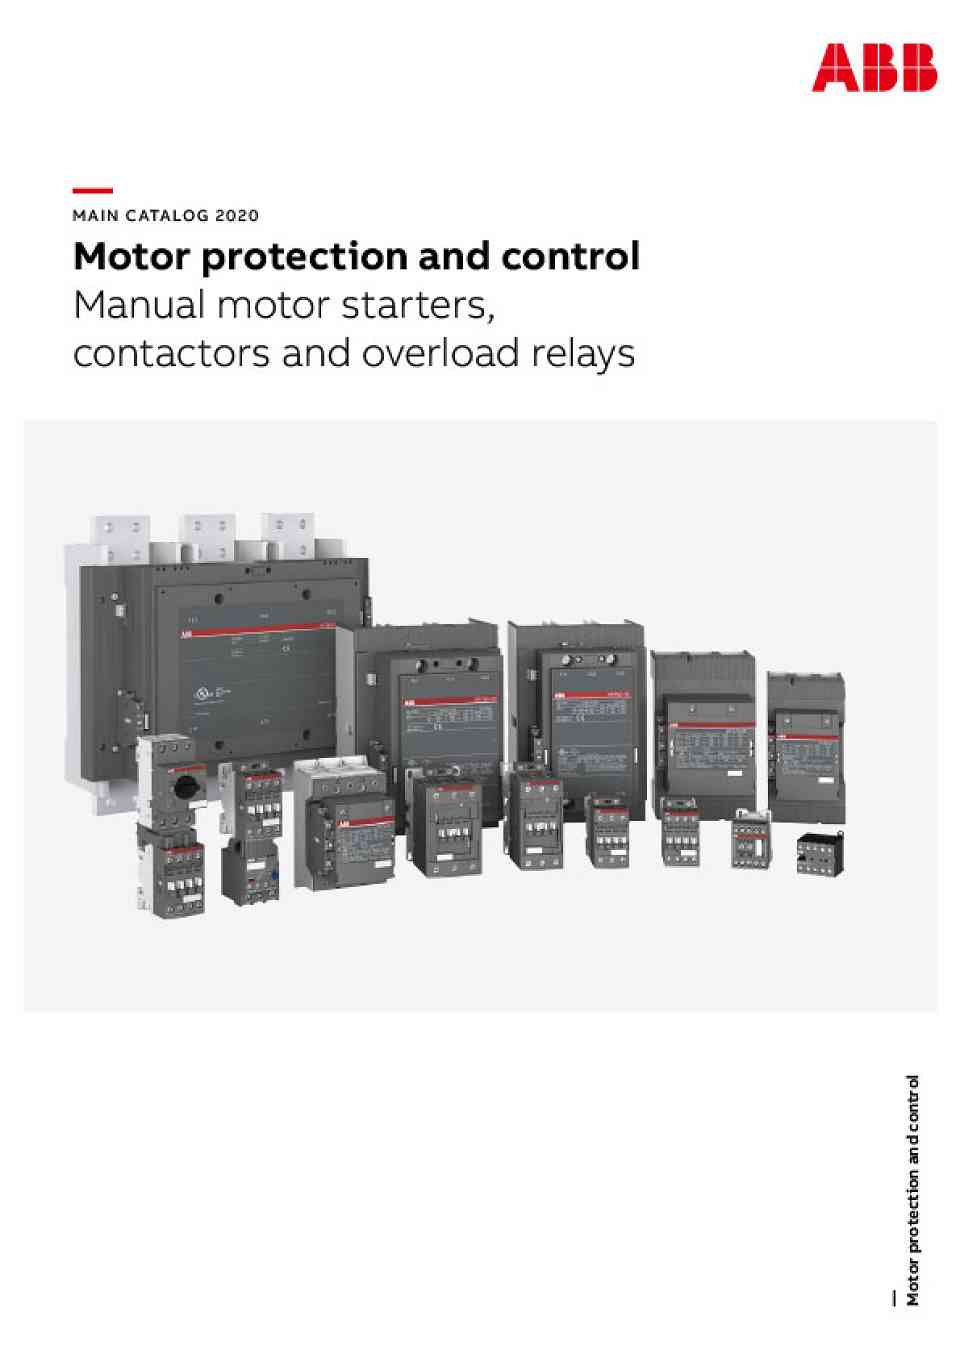 Motor Protection and Control Catalogue Cover